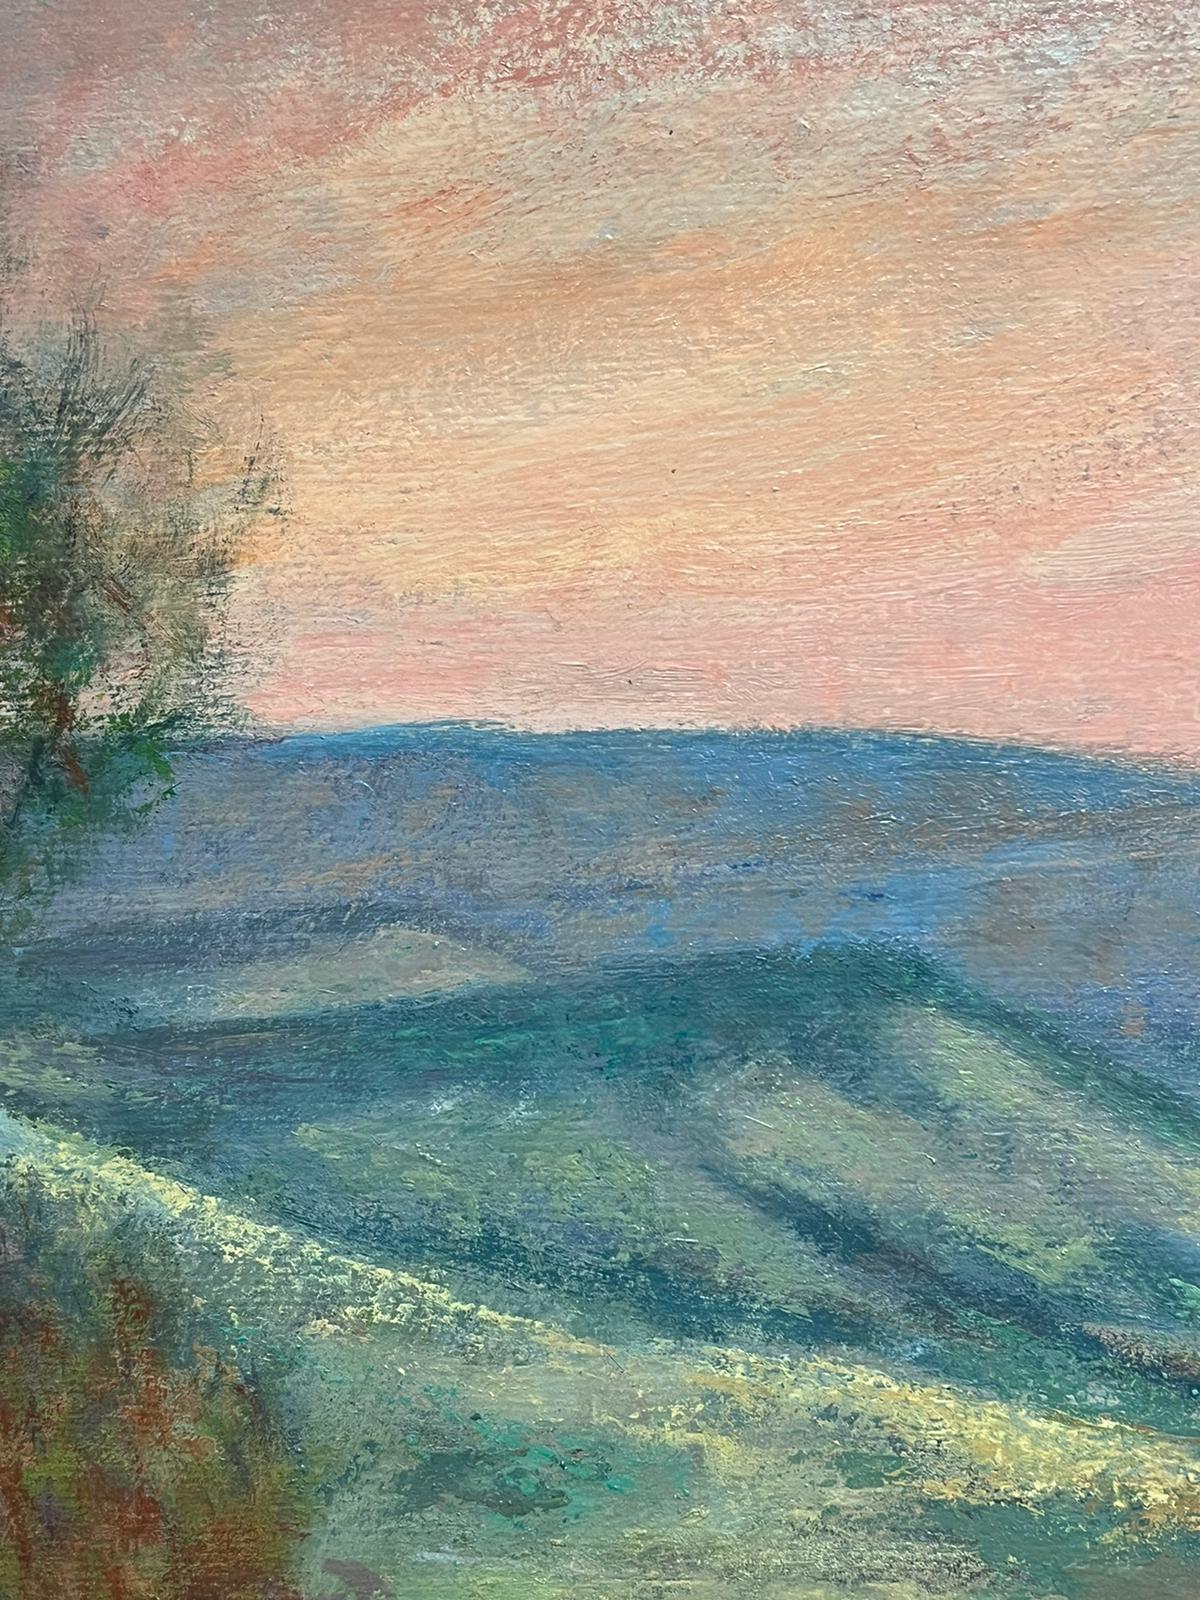 Hazy Sunset Fields
signed by Jacob Markiel (Polish 1911-2008) *See notes 
oil on board, unframed
canvas: 20 x 29 inches
provenance: the artists estate, south of France
condition: very good and sound condition

Jacob Markiel was born into a humble